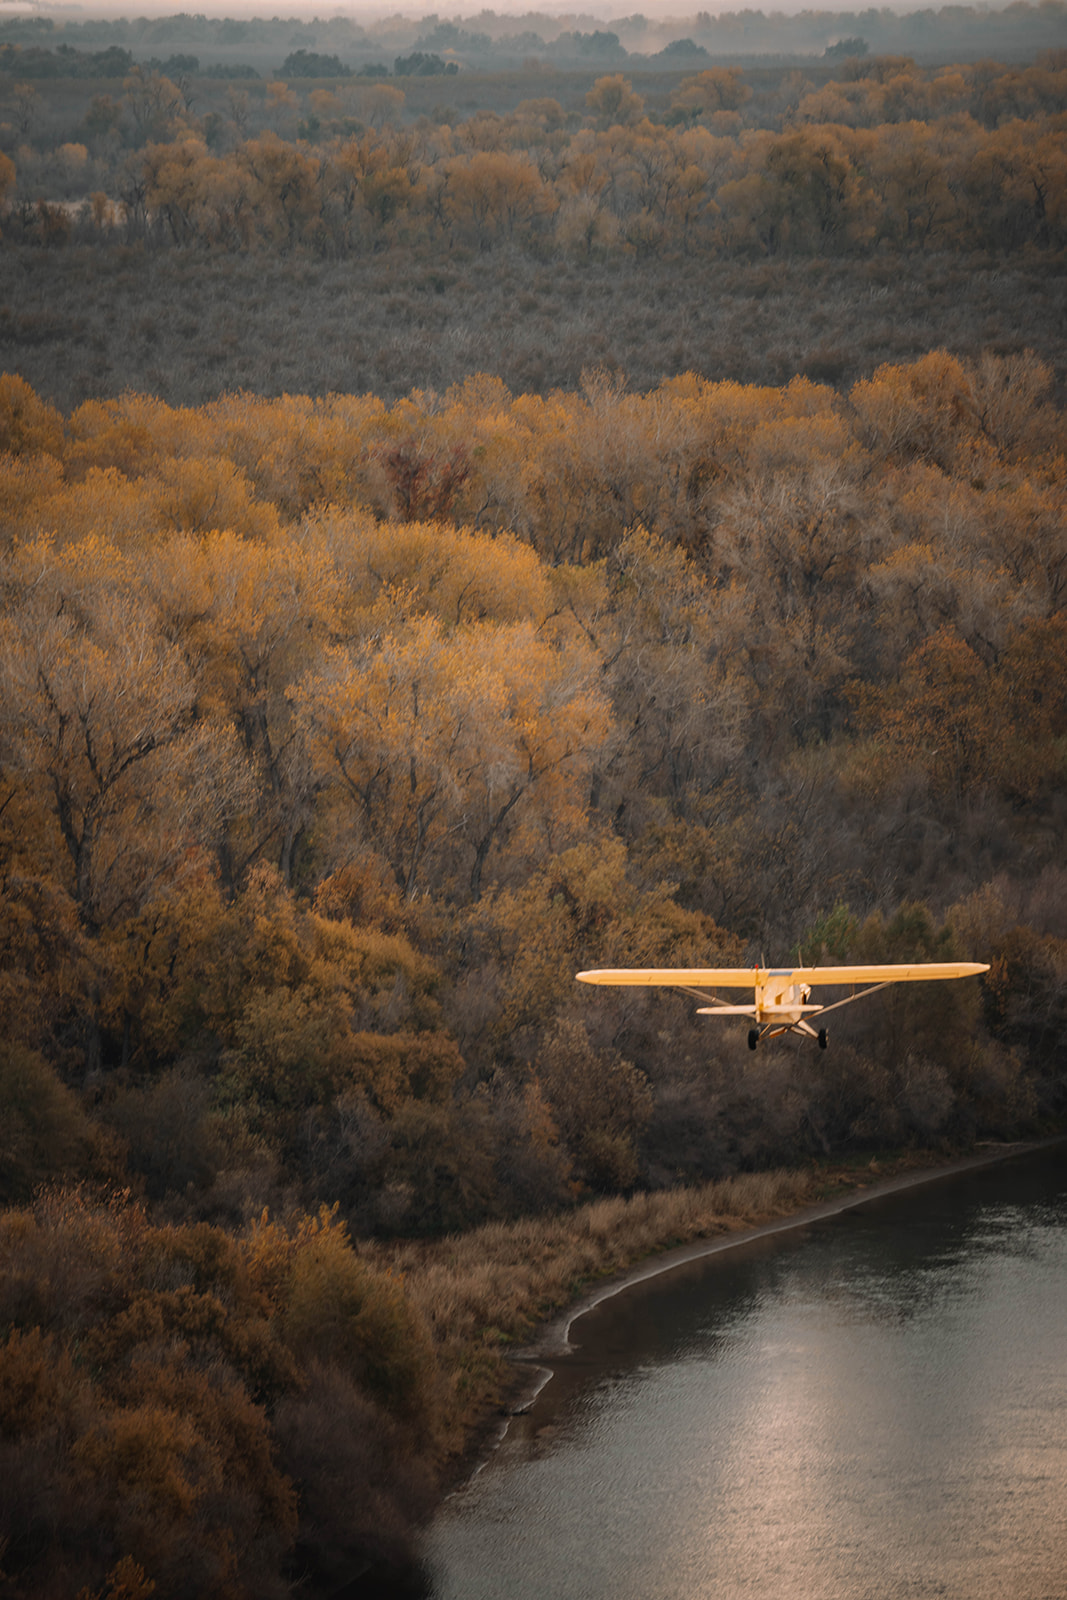 northern california photographer captures lifestyle images for pilots in airplanes